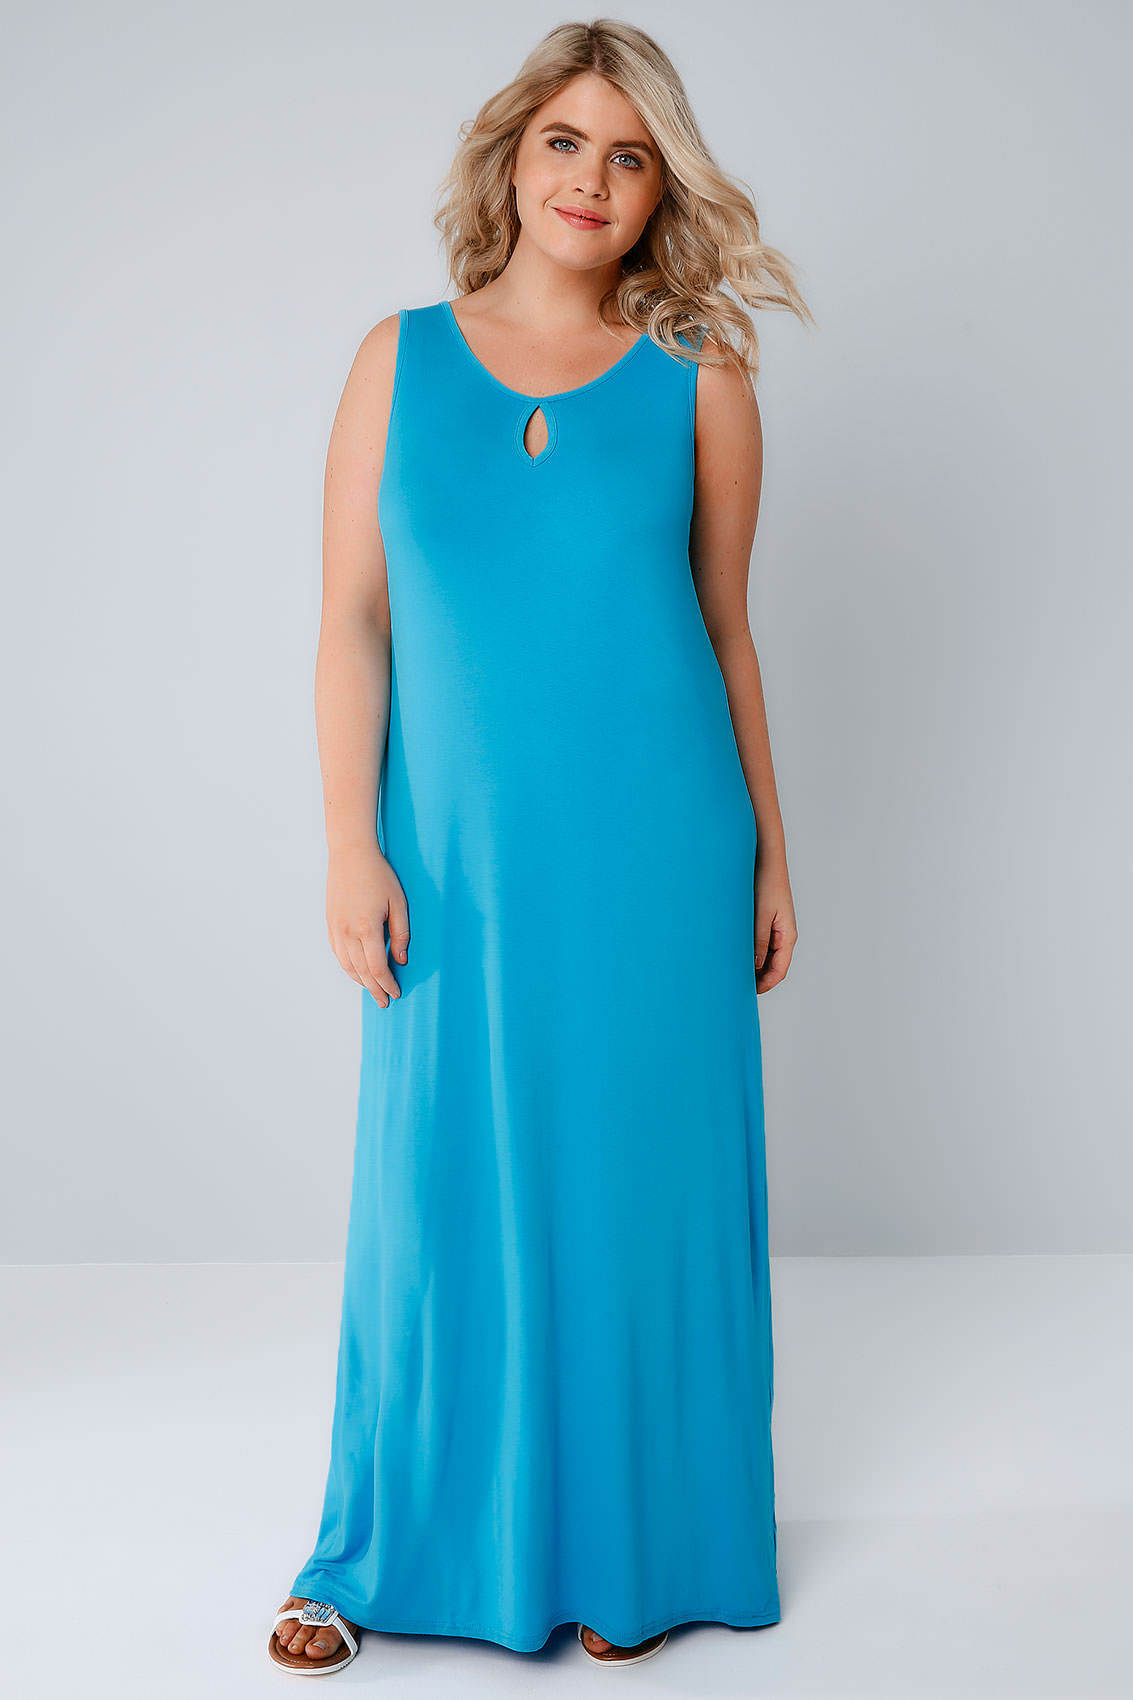 Blue Jersey Maxi Dress With Keyhole Detail, Plus size 16 to 36